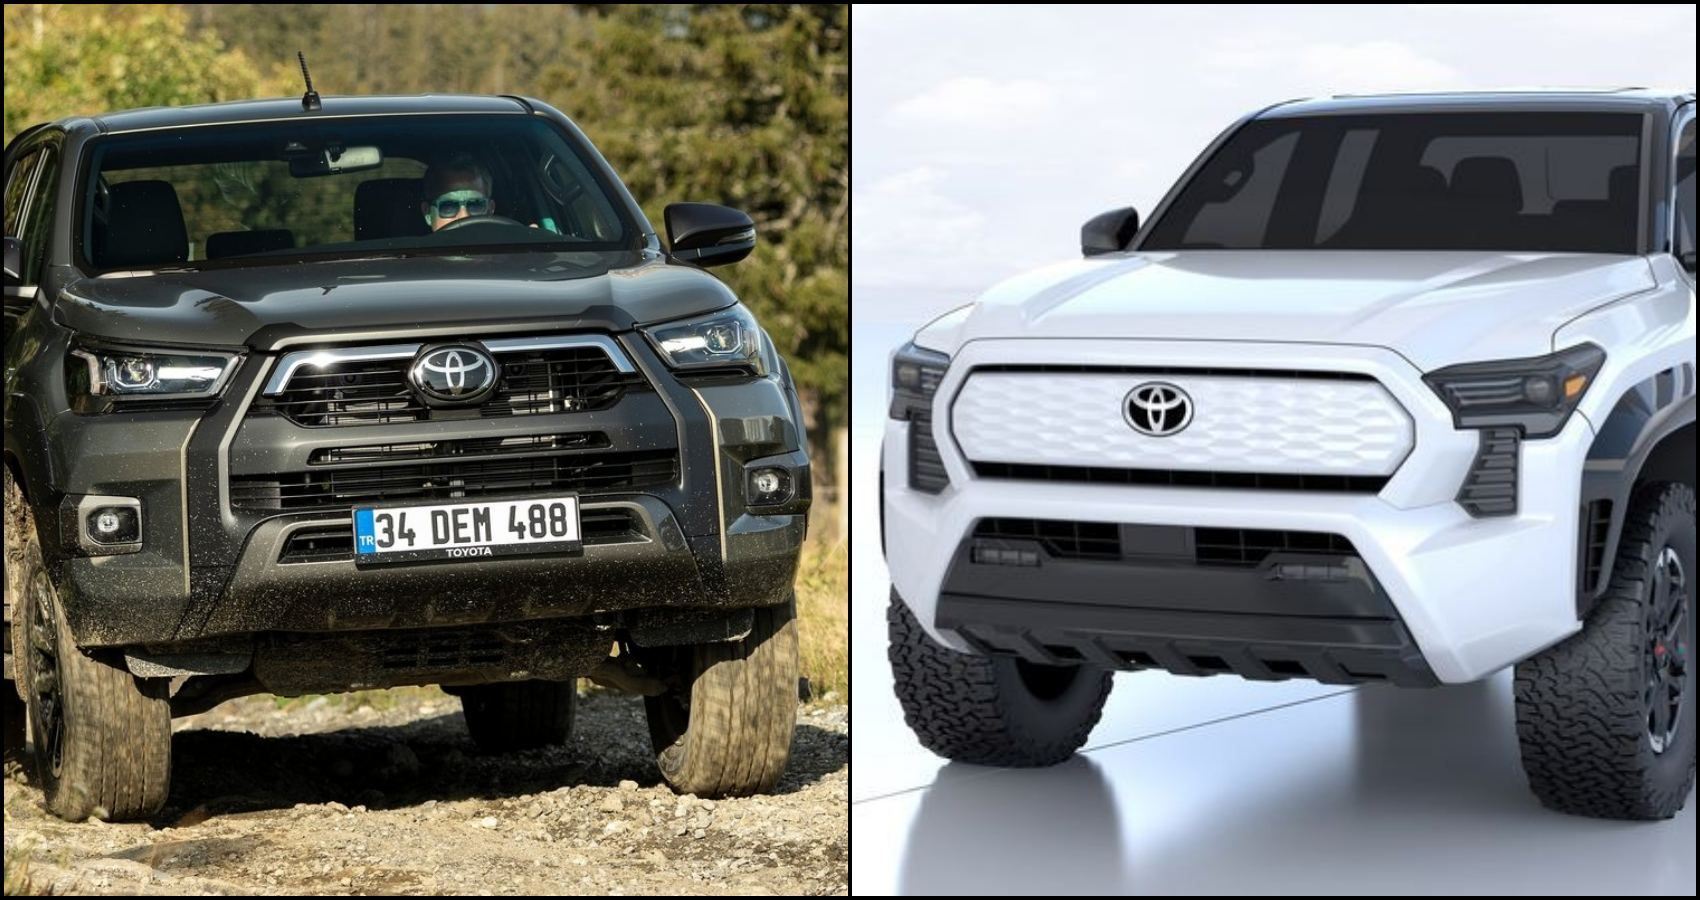 Toyota Hilux - Top 10 Things to know - CarLelo